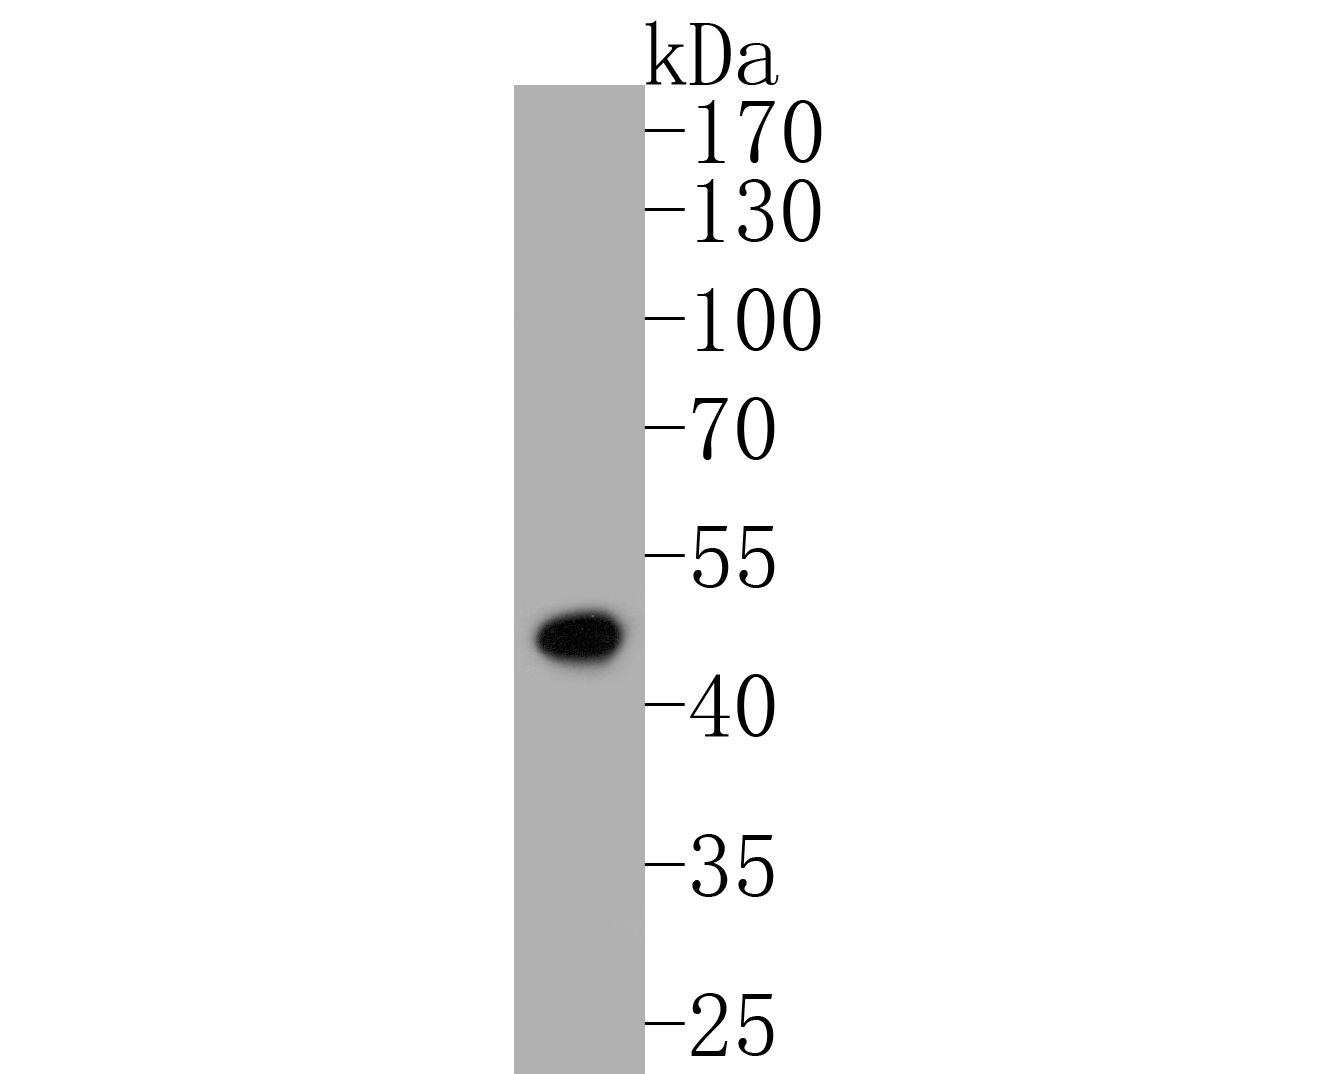 Western blot analysis of FH on K562 cell lysates. Proteins were transferred to a PVDF membrane and blocked with 5% BSA in PBS for 1 hour at room temperature. The primary antibody (ER1902-01, 1/500) was used in 5% BSA at room temperature for 2 hours. Goat Anti-Rabbit IgG - HRP Secondary Antibody (HA1001) at 1:5,000 dilution was used for 1 hour at room temperature.